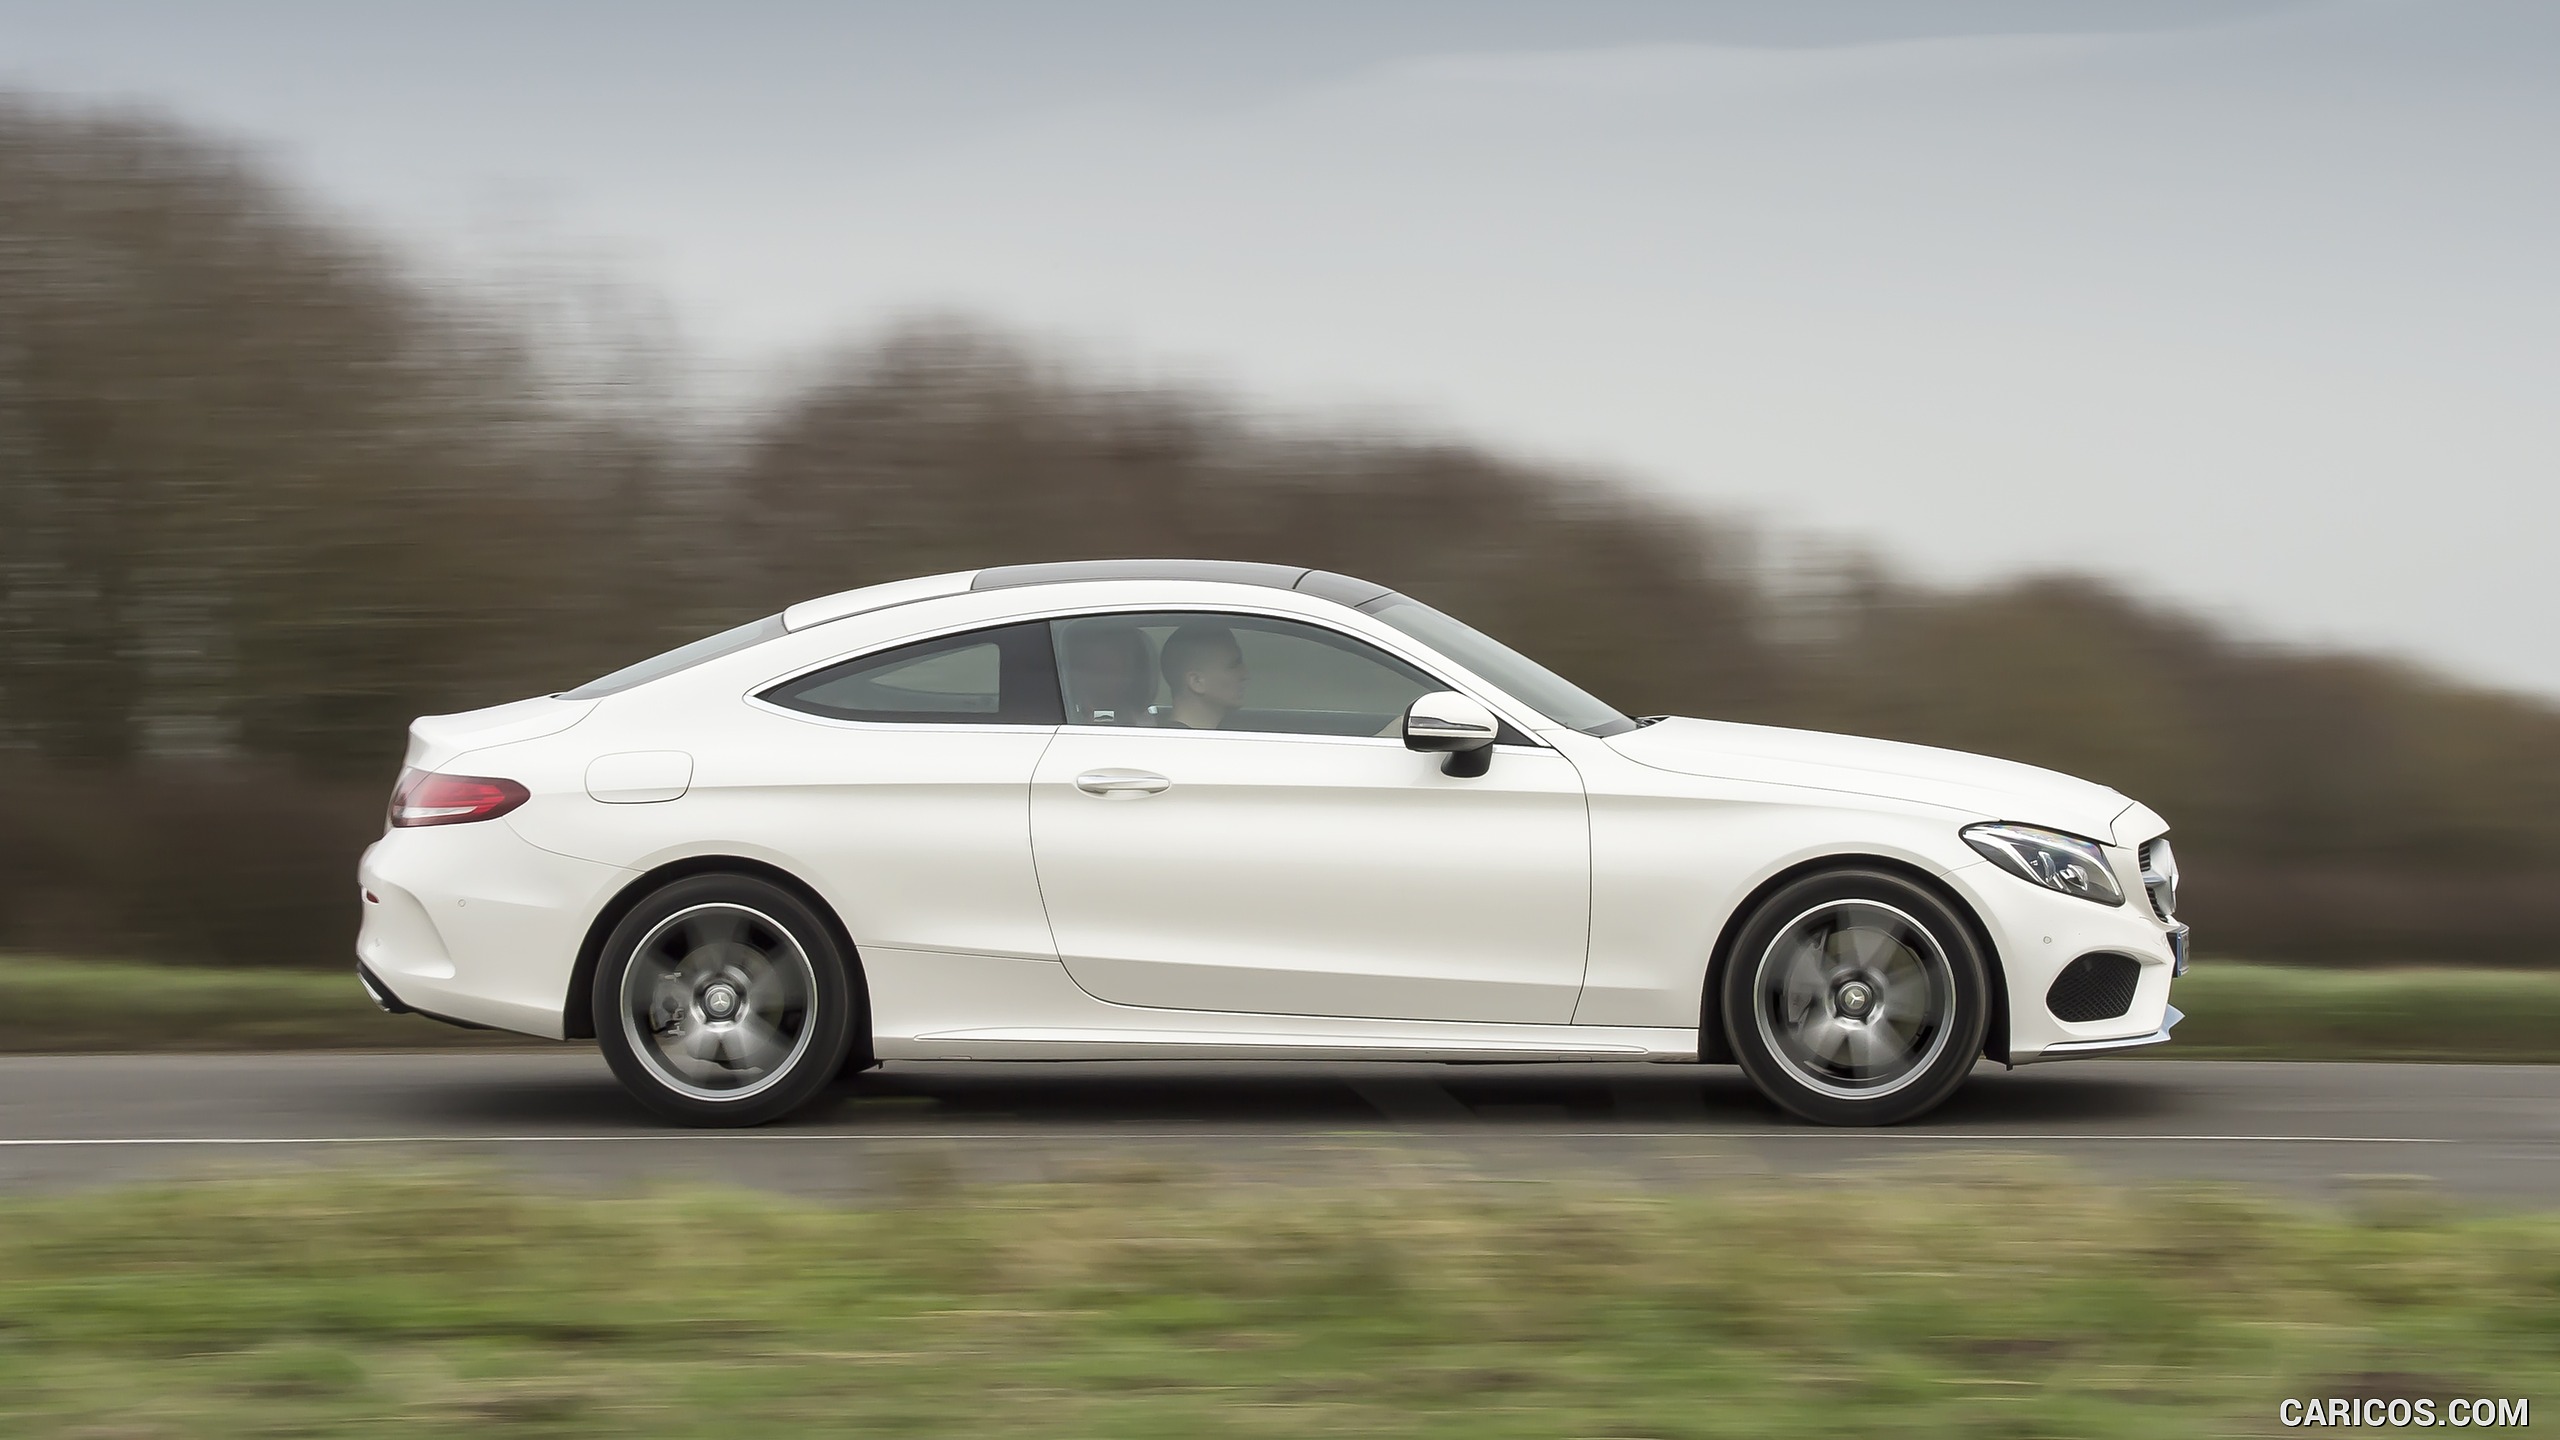 2017 Mercedes-Benz C-Class Coupe (UK-Spec) - Side, #123 of 210